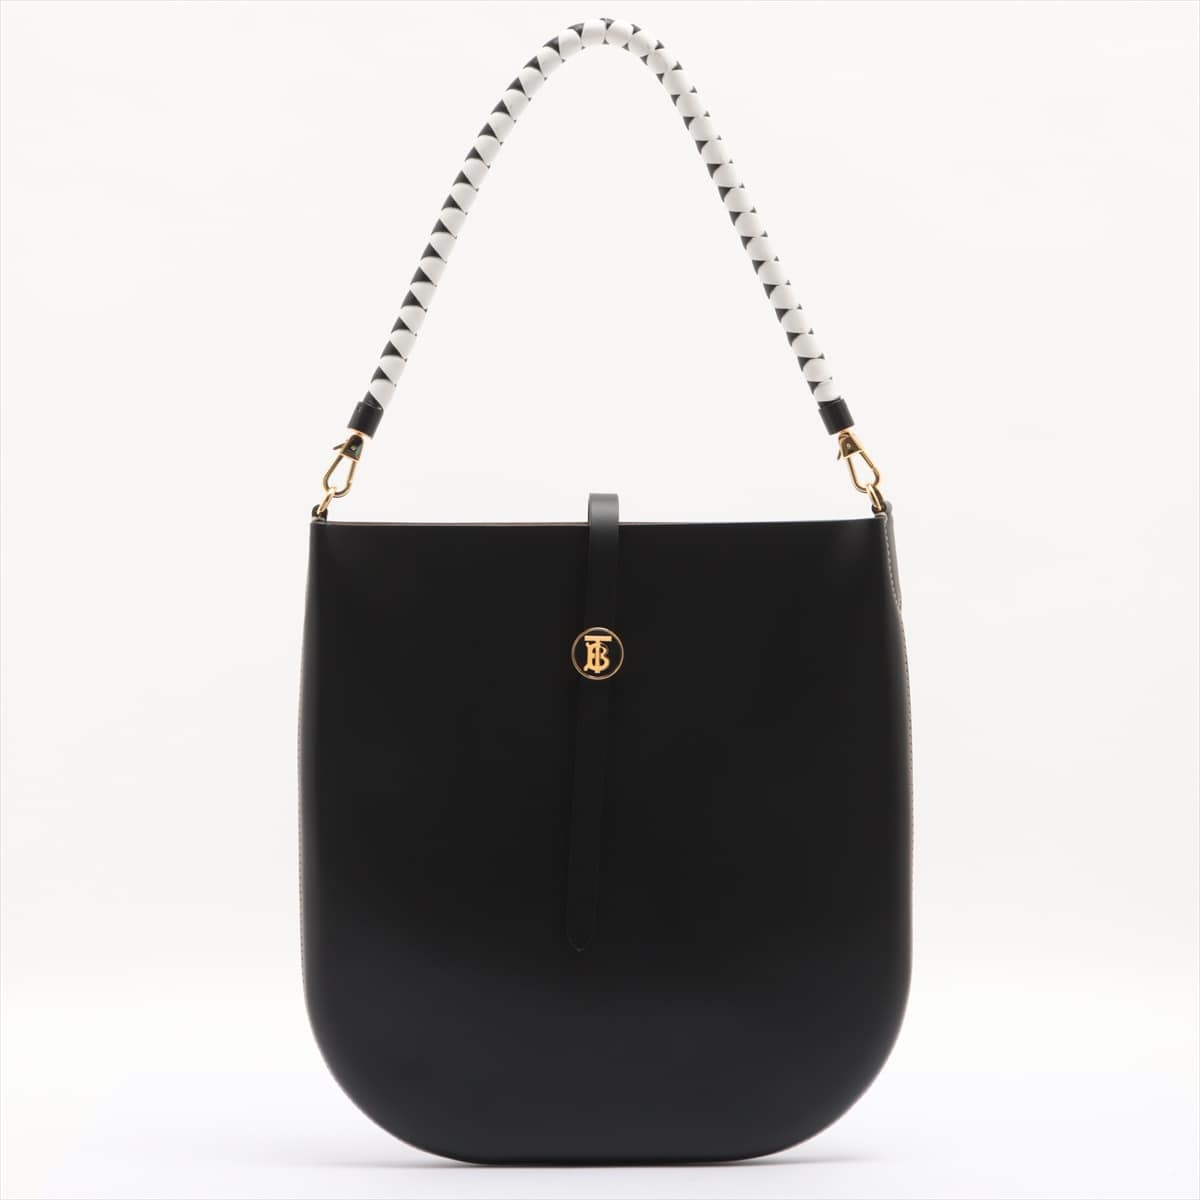 Burberry TB Leather Tote bag Black